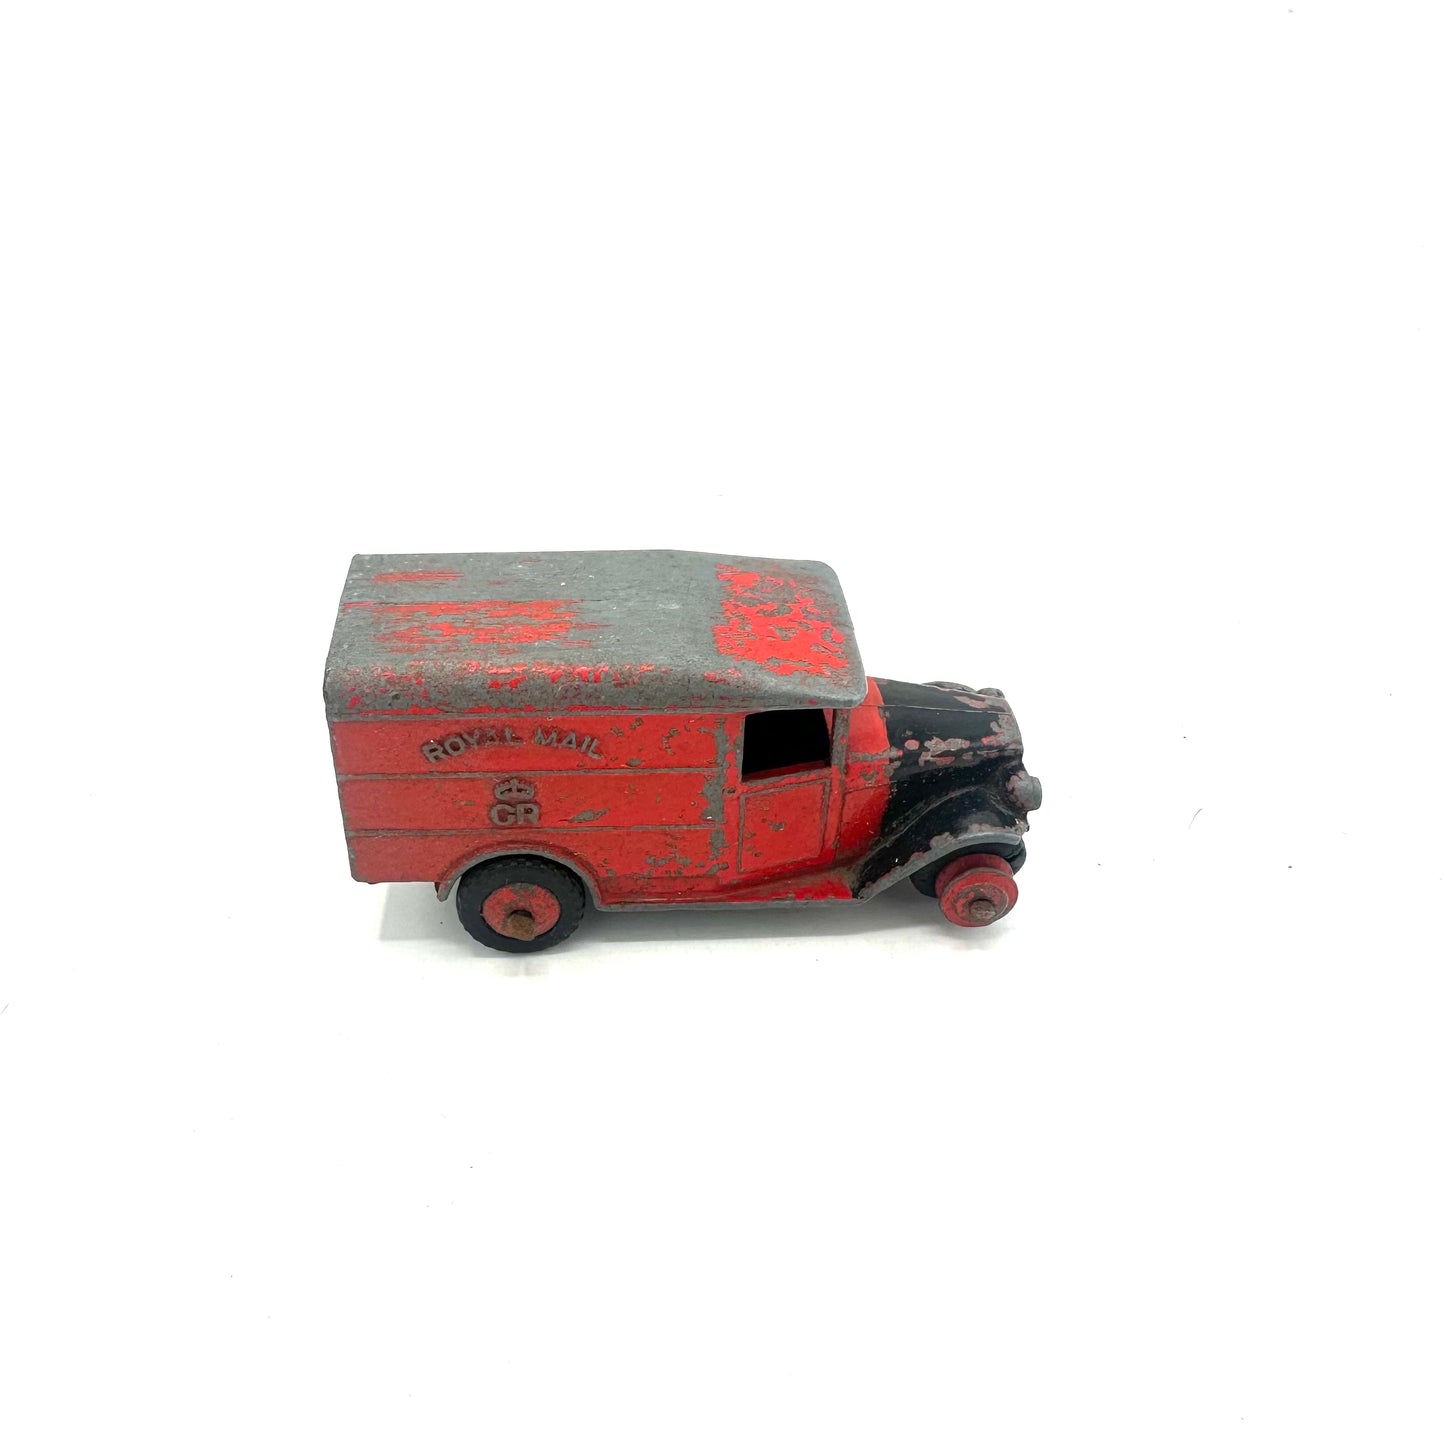 Vintage 1948 Dinky 34B Postal Royal Mail Van Collectable Push Pull Toy